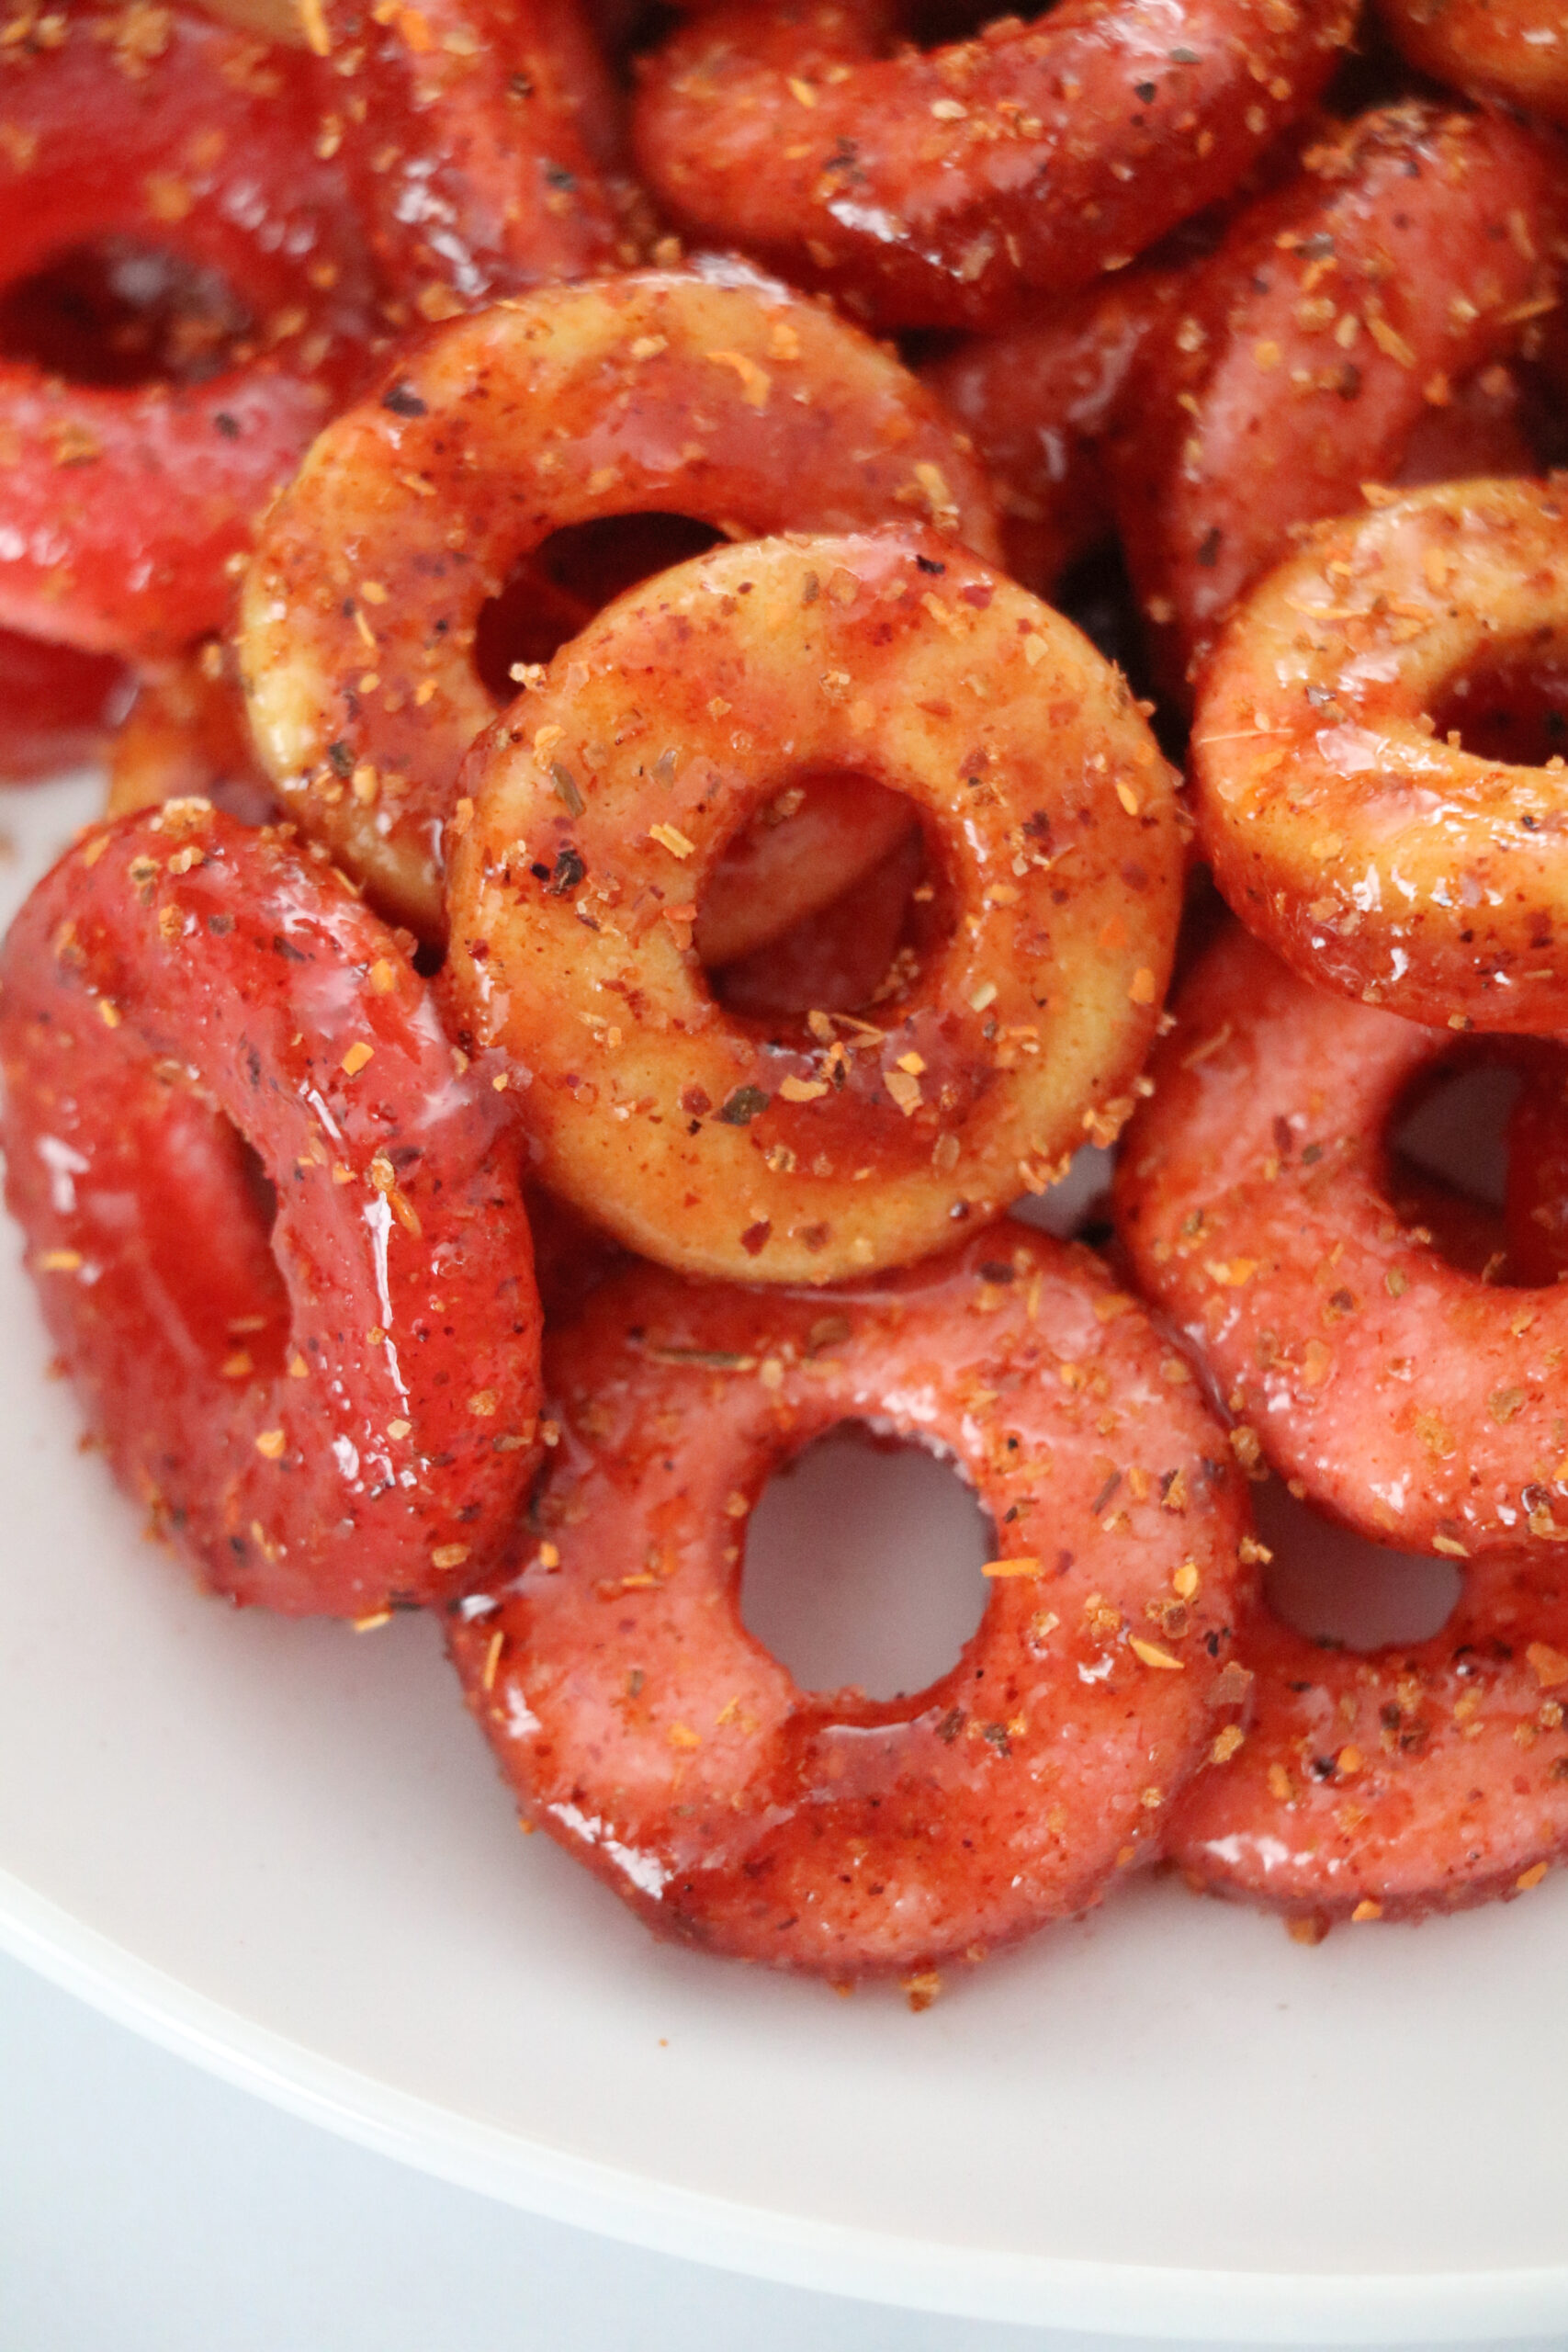 dulce enchilados peach and watermelon rings